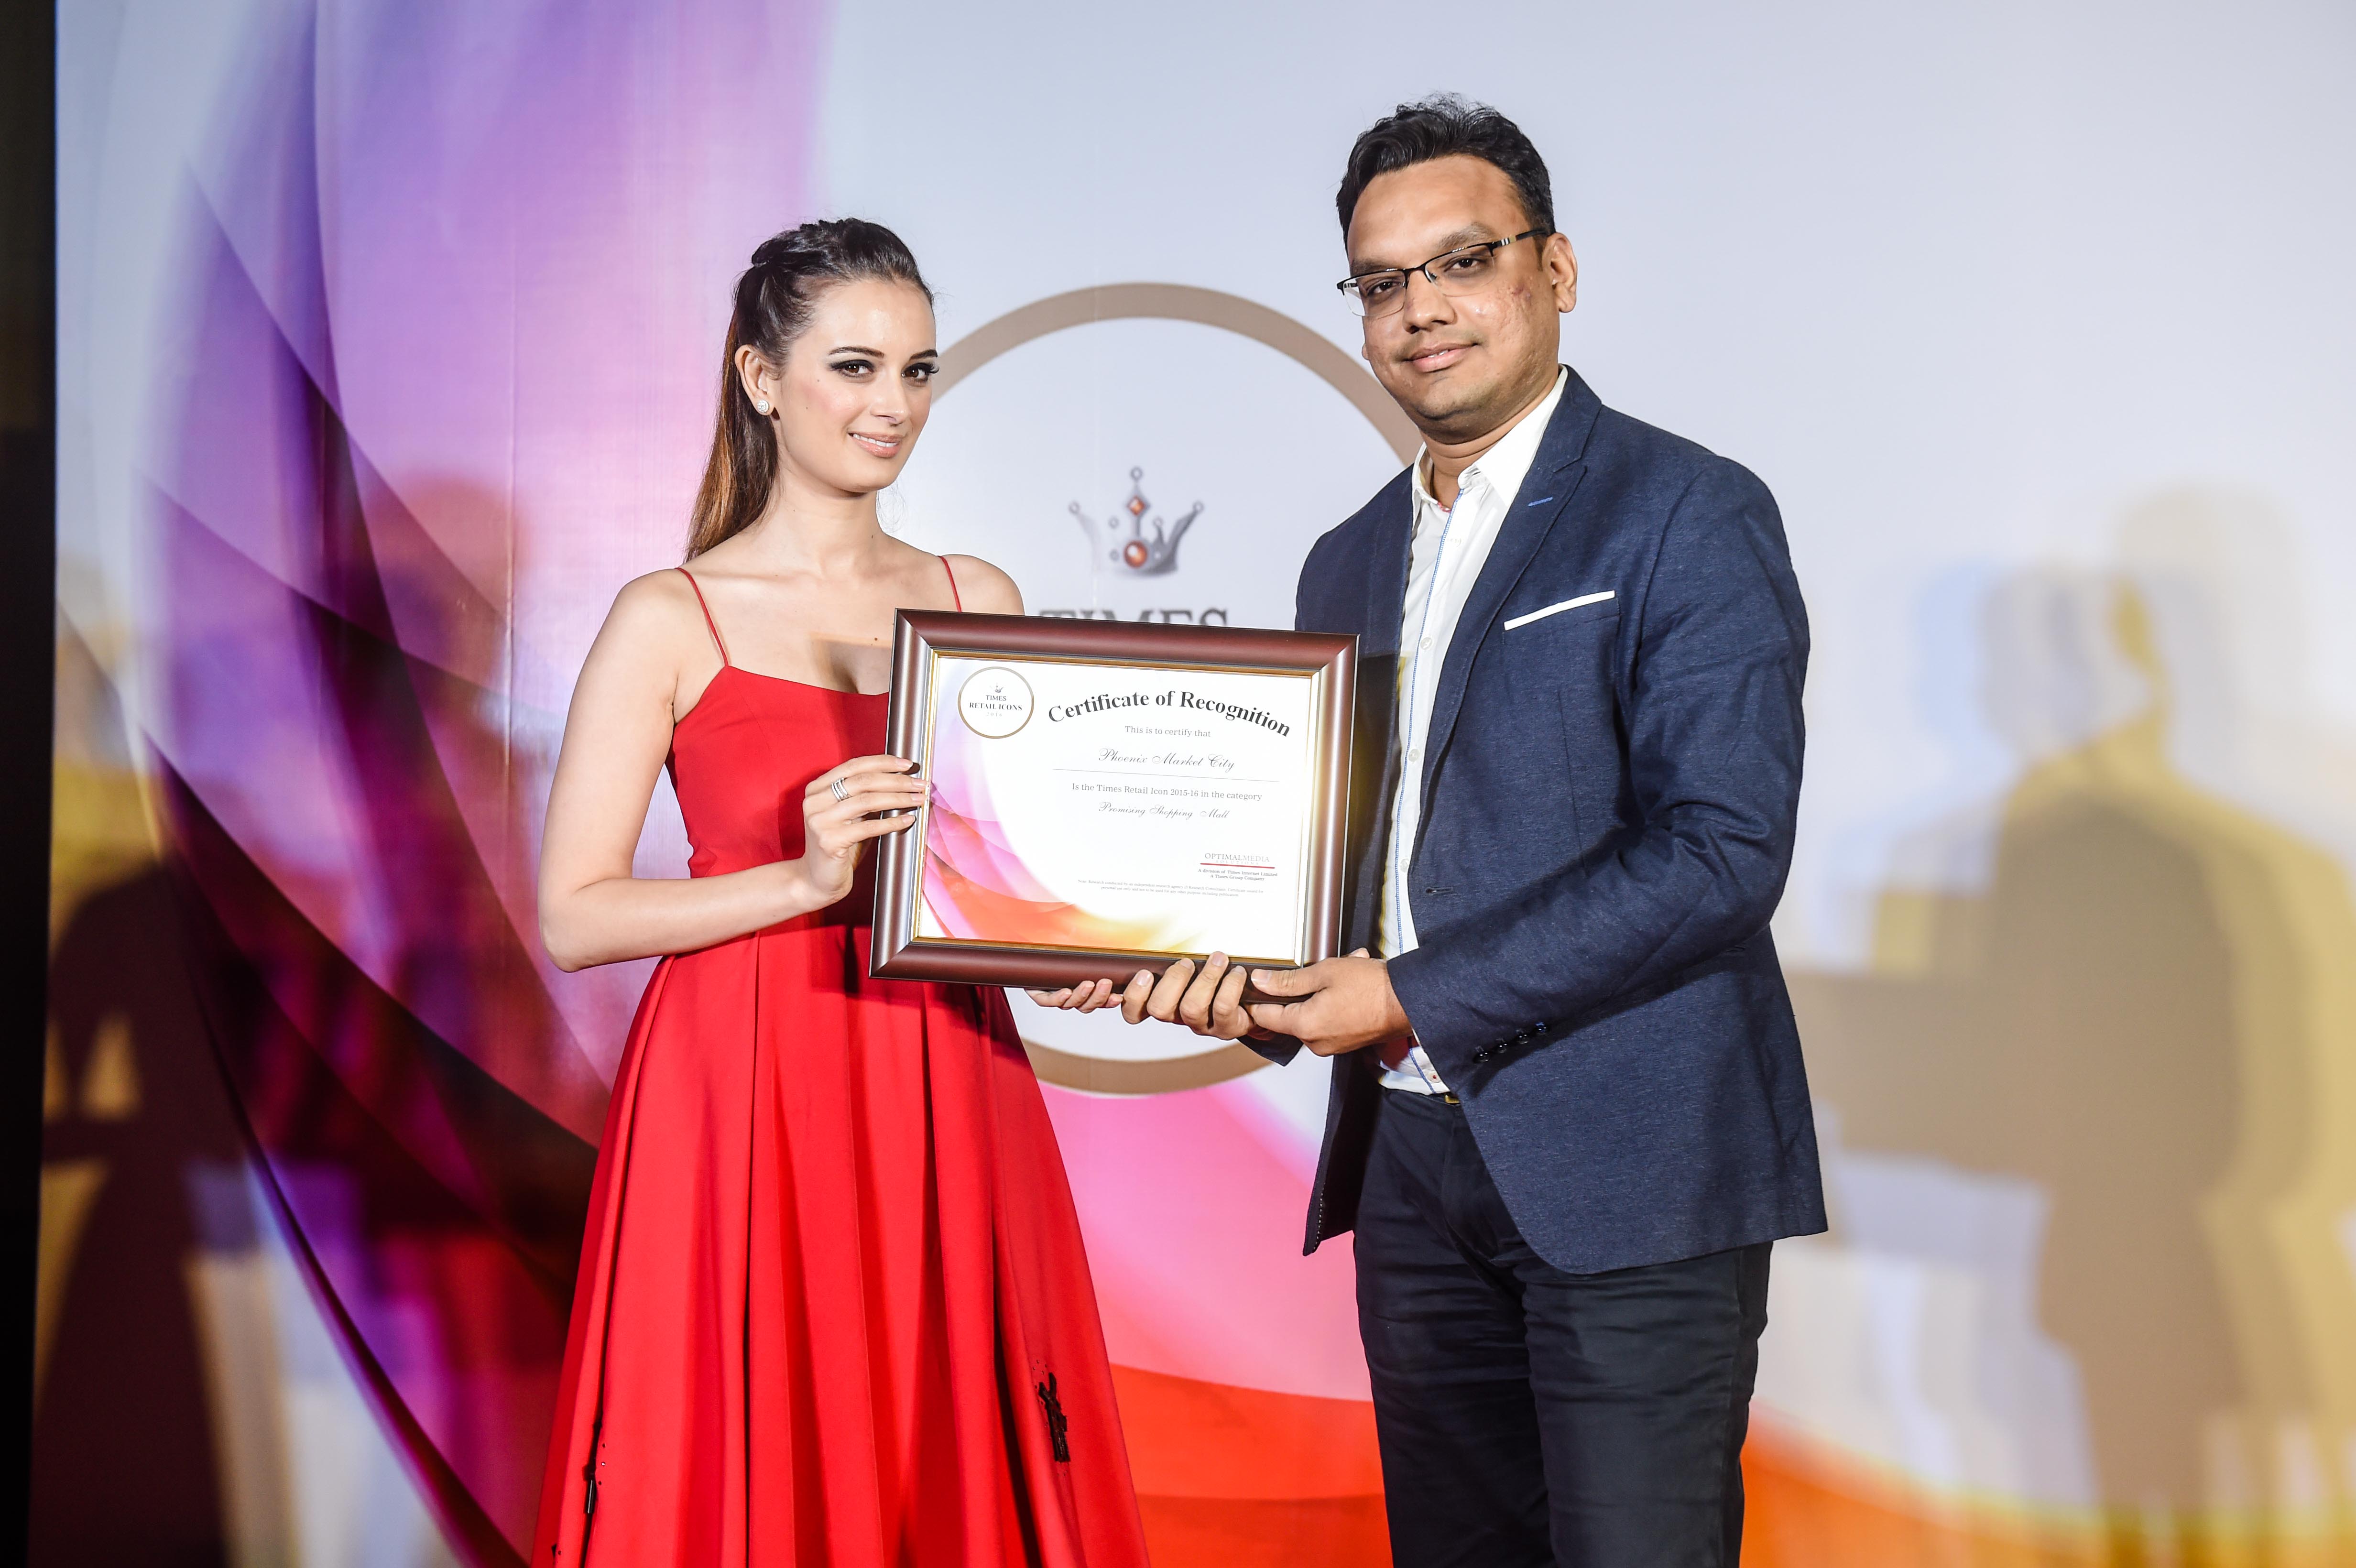 Bollywood Actress Evelyn Sharma presents Times Retail Icon Award to Mayank Lalpuria for Most promising shopping Mall of the Year - Phoenix Marketcity, Kurla